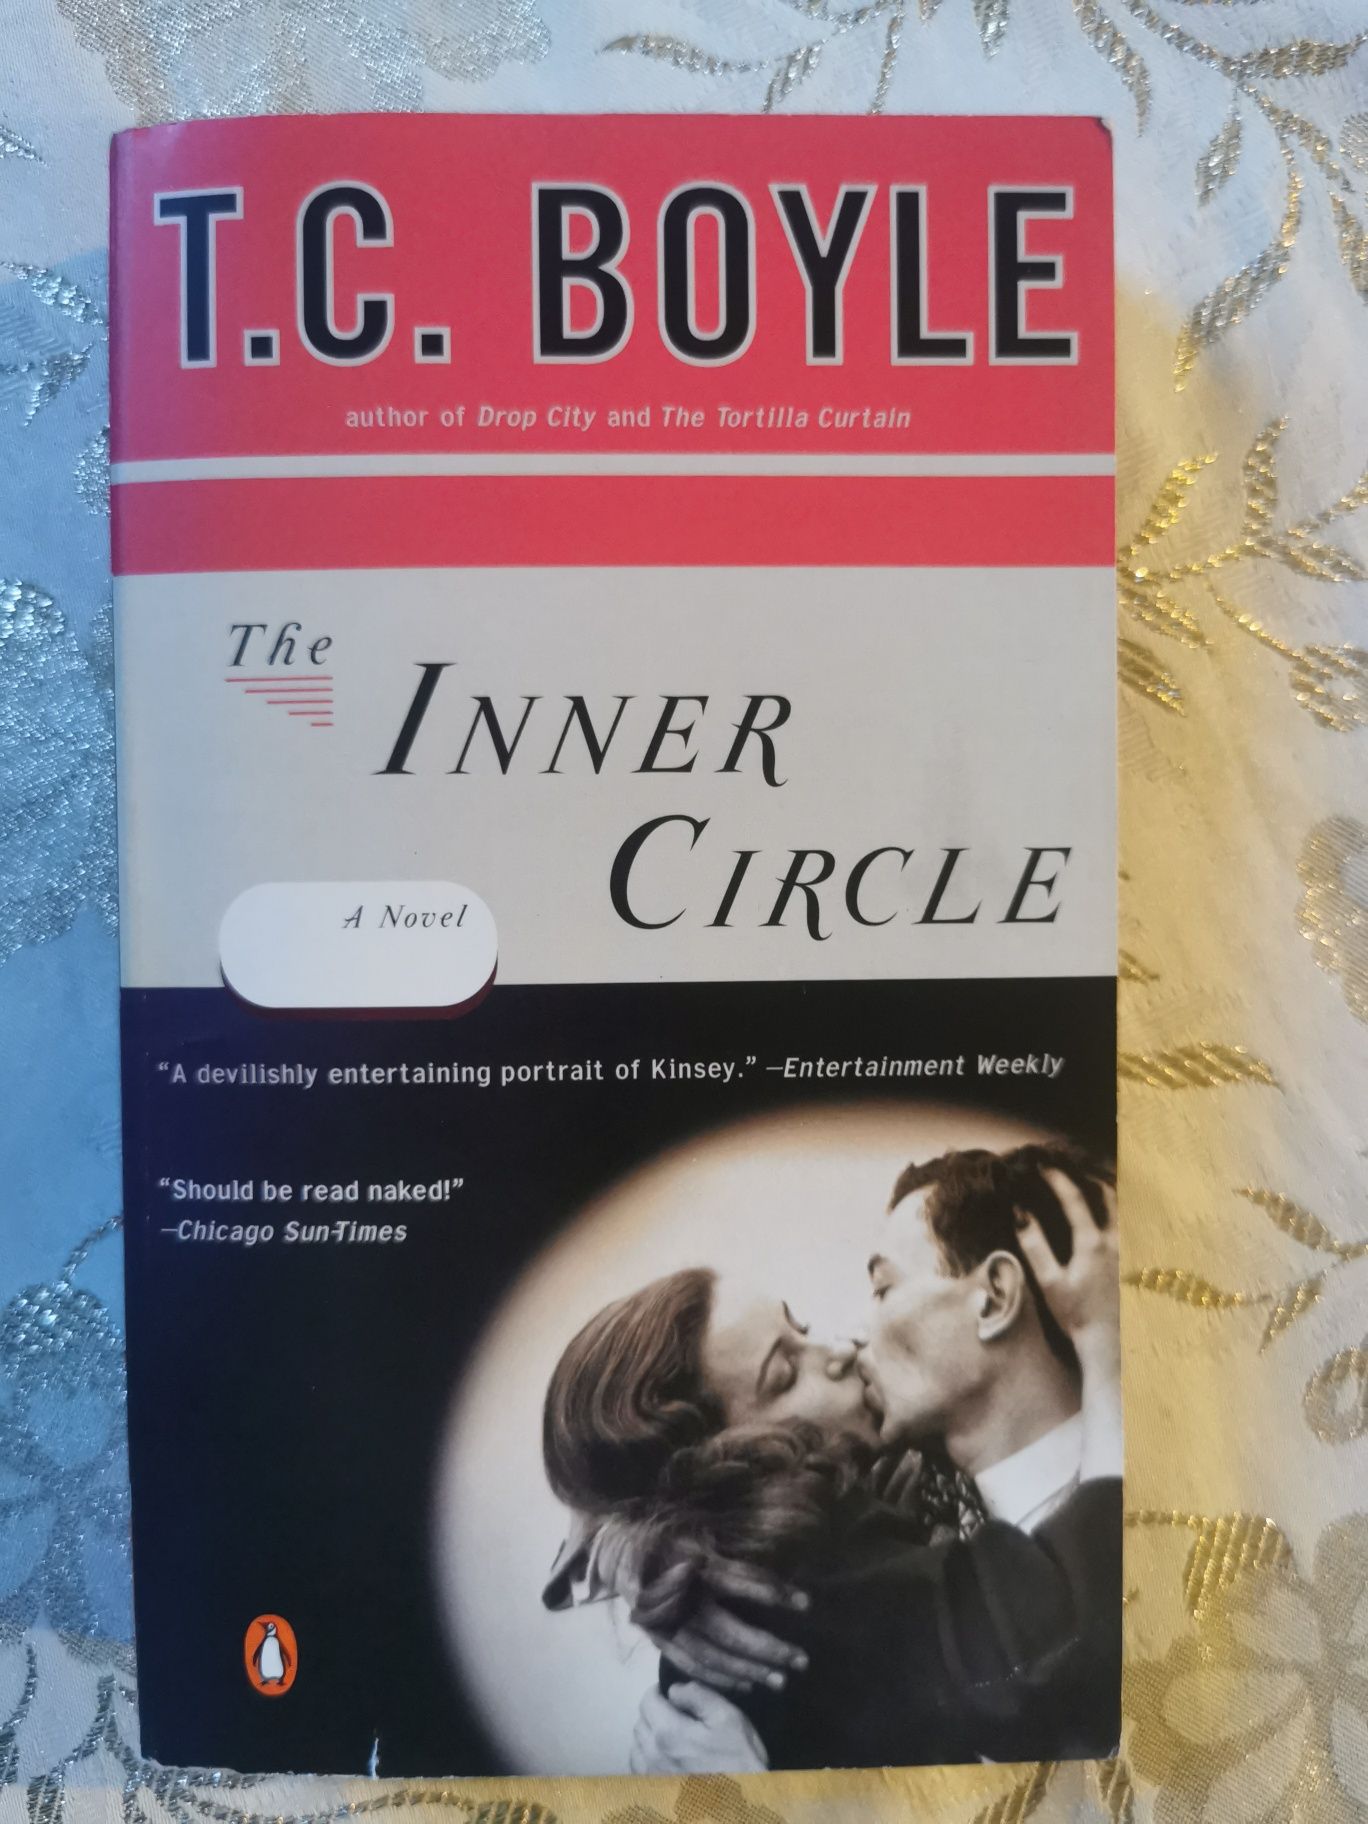 The Inner Circle Reader’s Guide
BY T.C. BOYLE